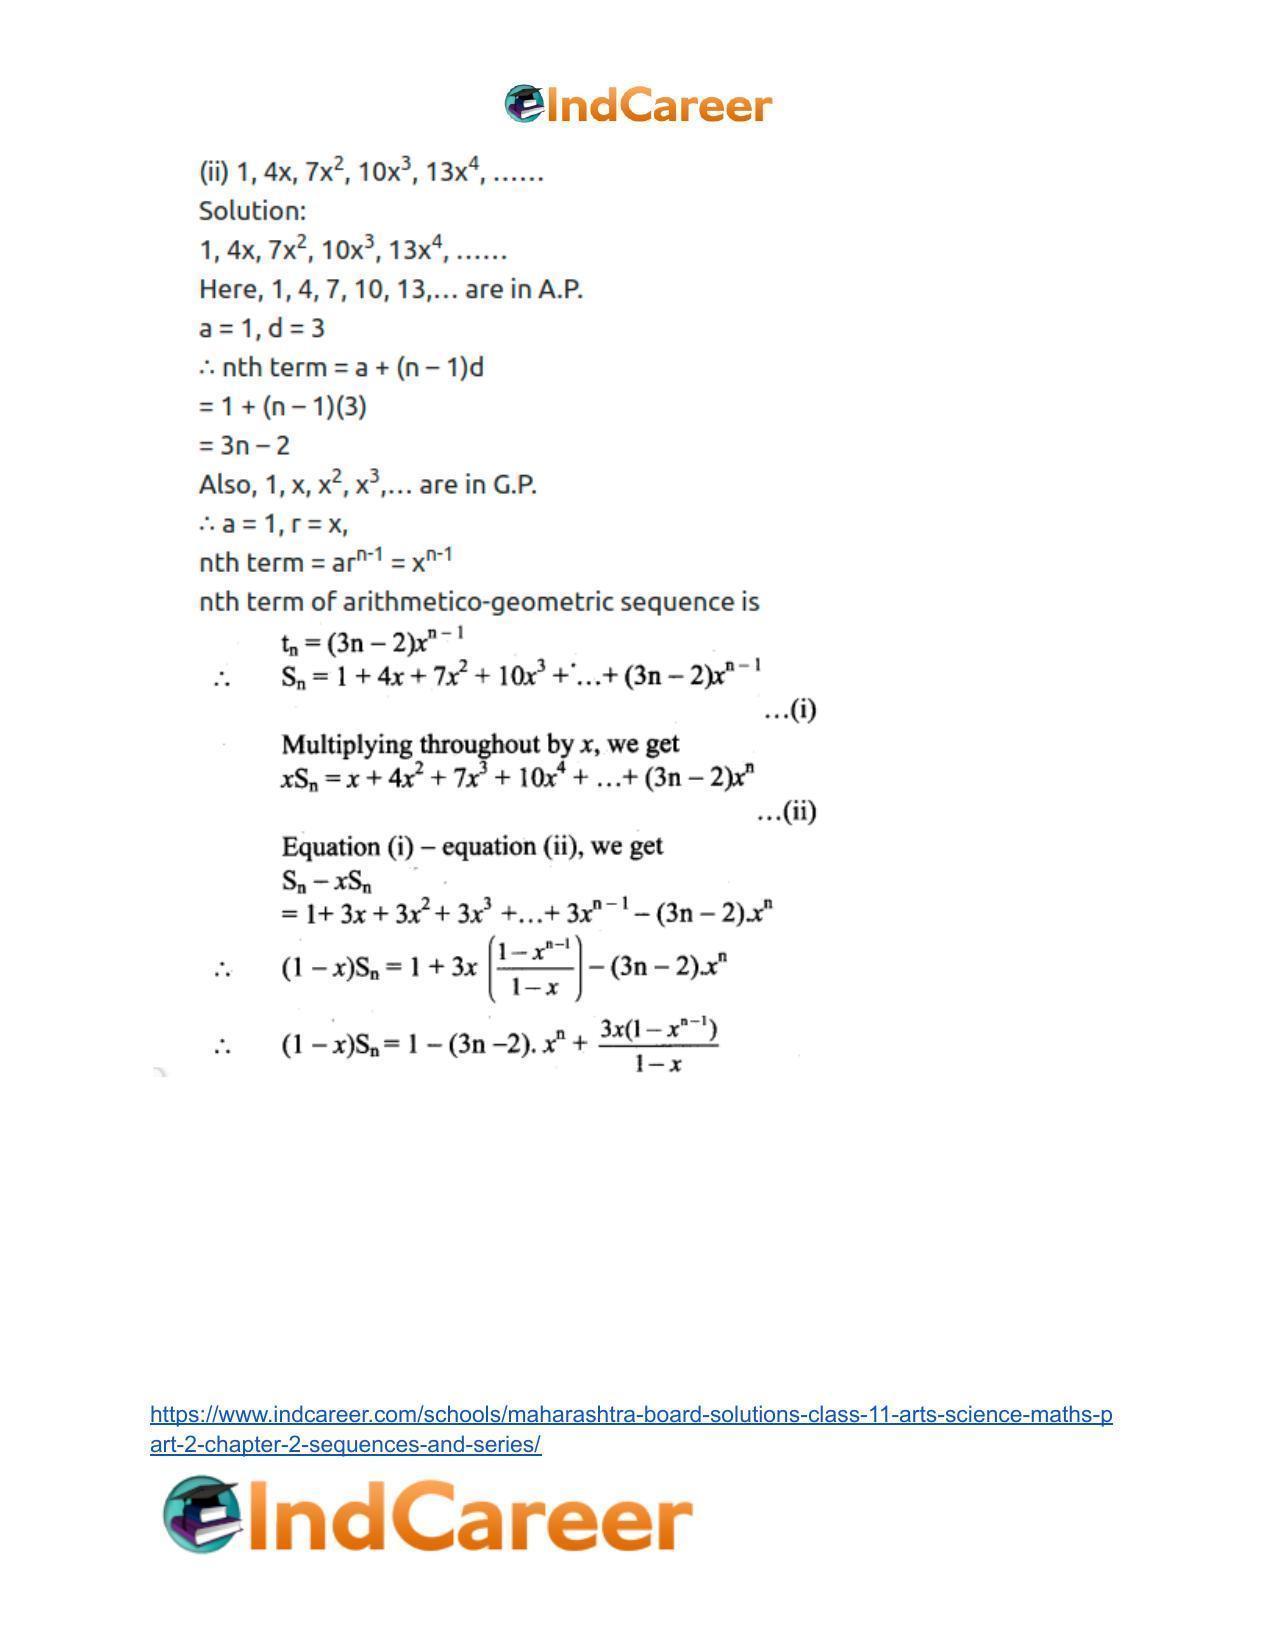 Maharashtra Board Solutions Class 11-Arts & Science Maths (Part 2): Chapter 2- Sequences and Series - Page 61